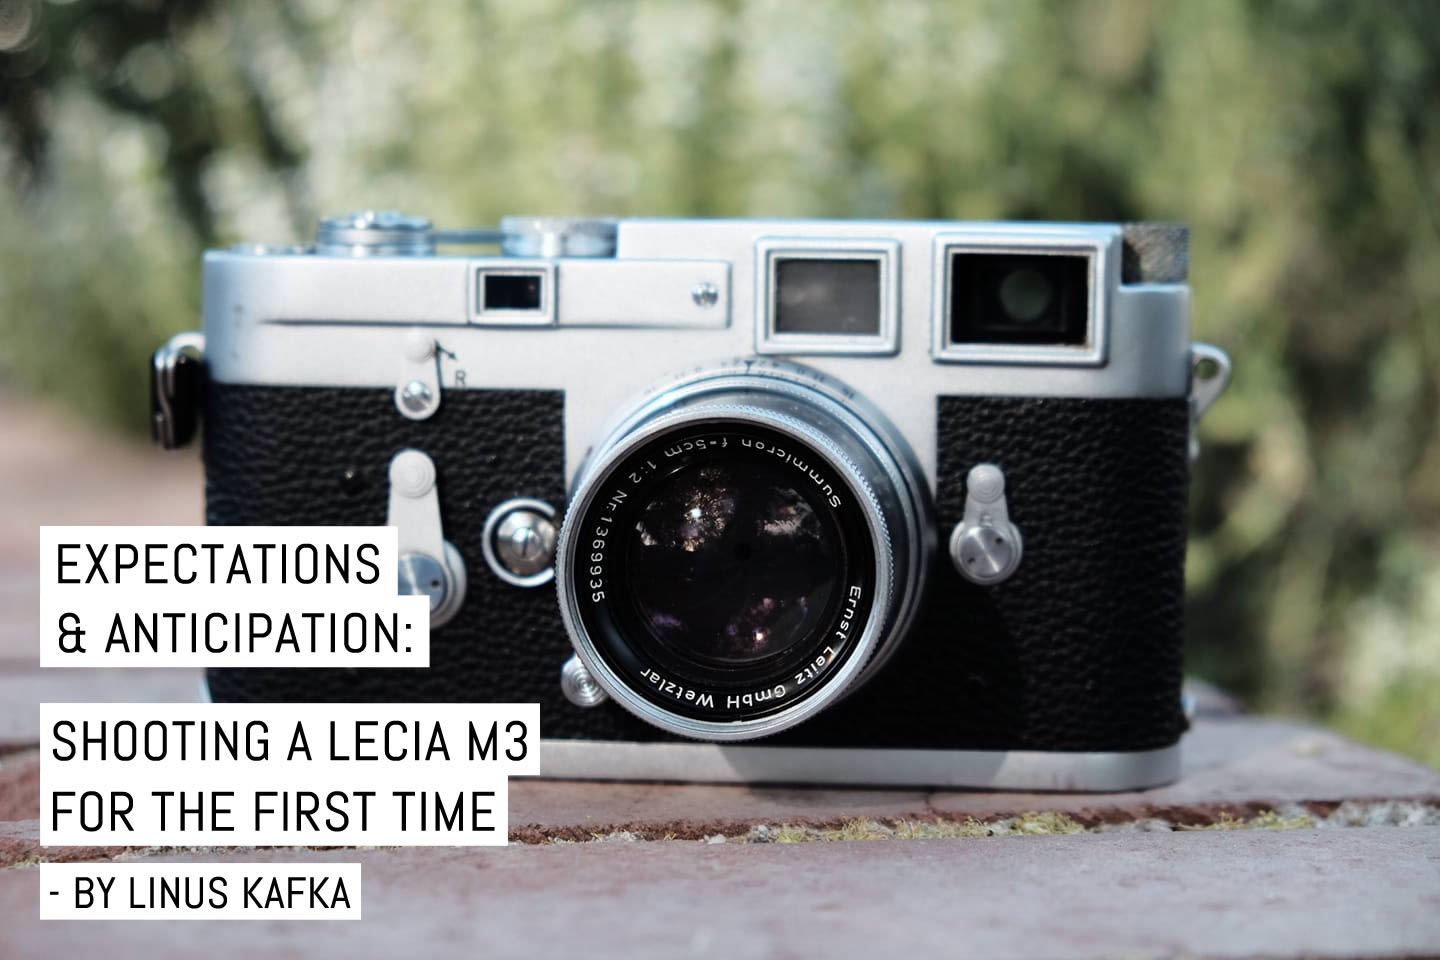 Expectations and anticipation: Shooting a Leica M3 for the first time